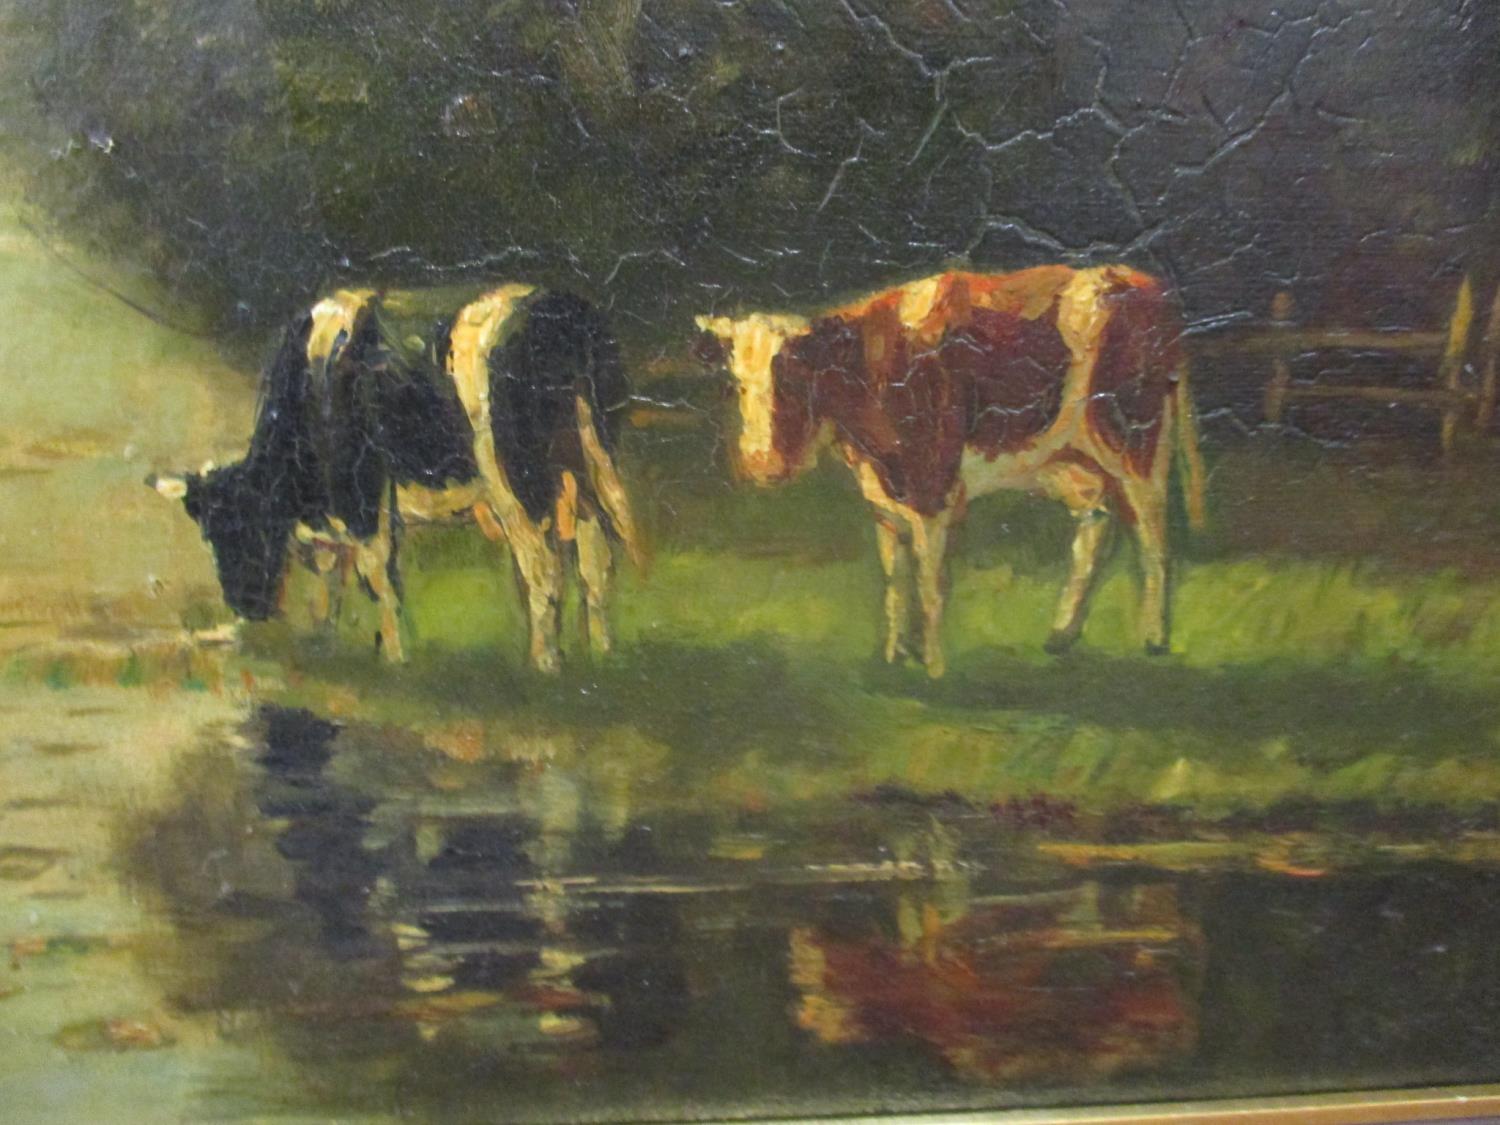 Early 20th century British School - cattle by a river, oil on canvas, framed - Image 2 of 3